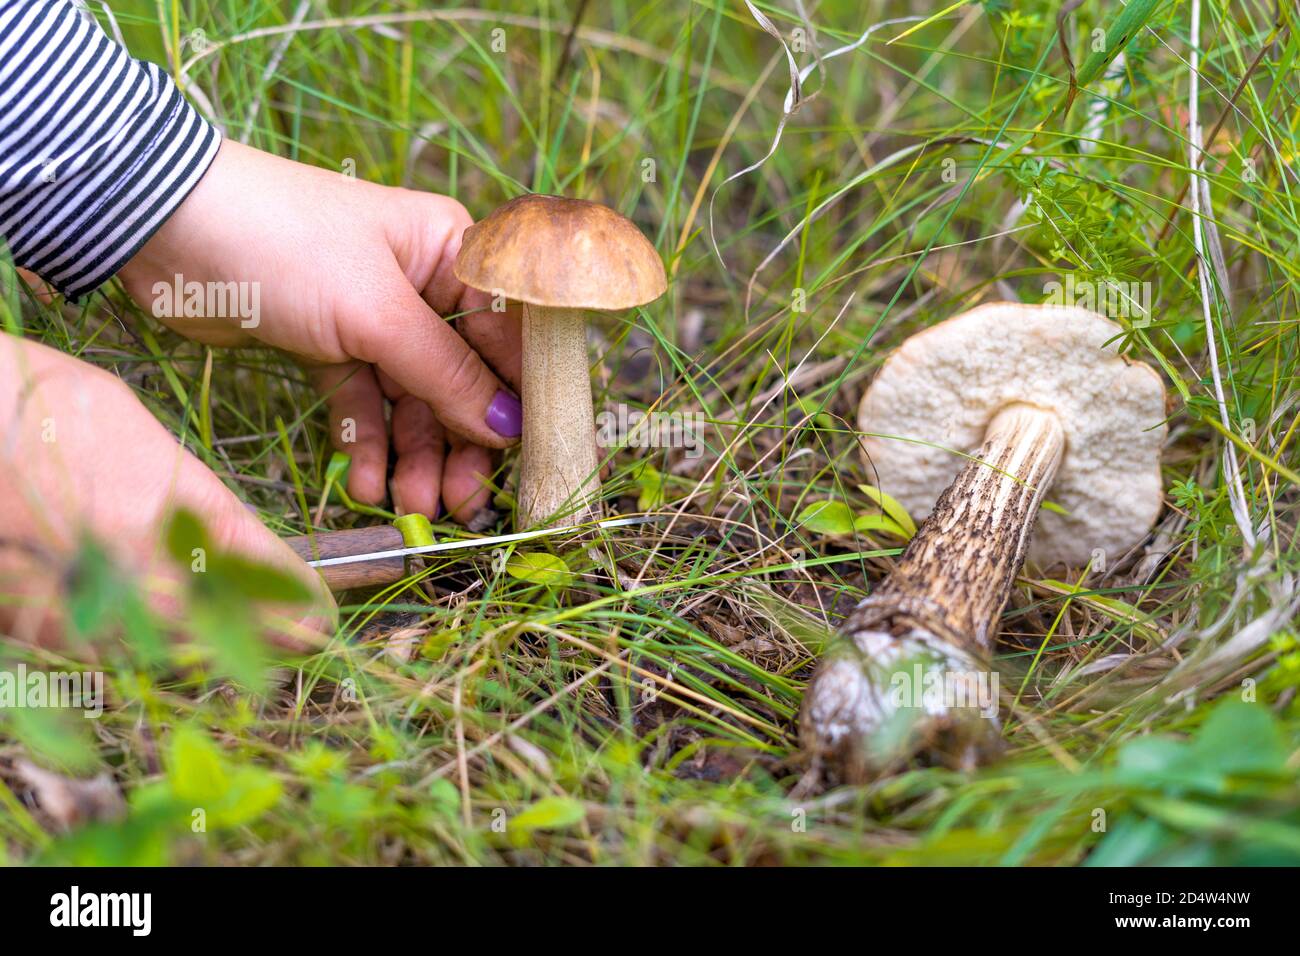 Women's hands close-up for picking mushrooms in the forest. A woman cuts a mushroom with a knife, another mushroom is lying on the grass. Close up view. Selective focus. Stock Photo